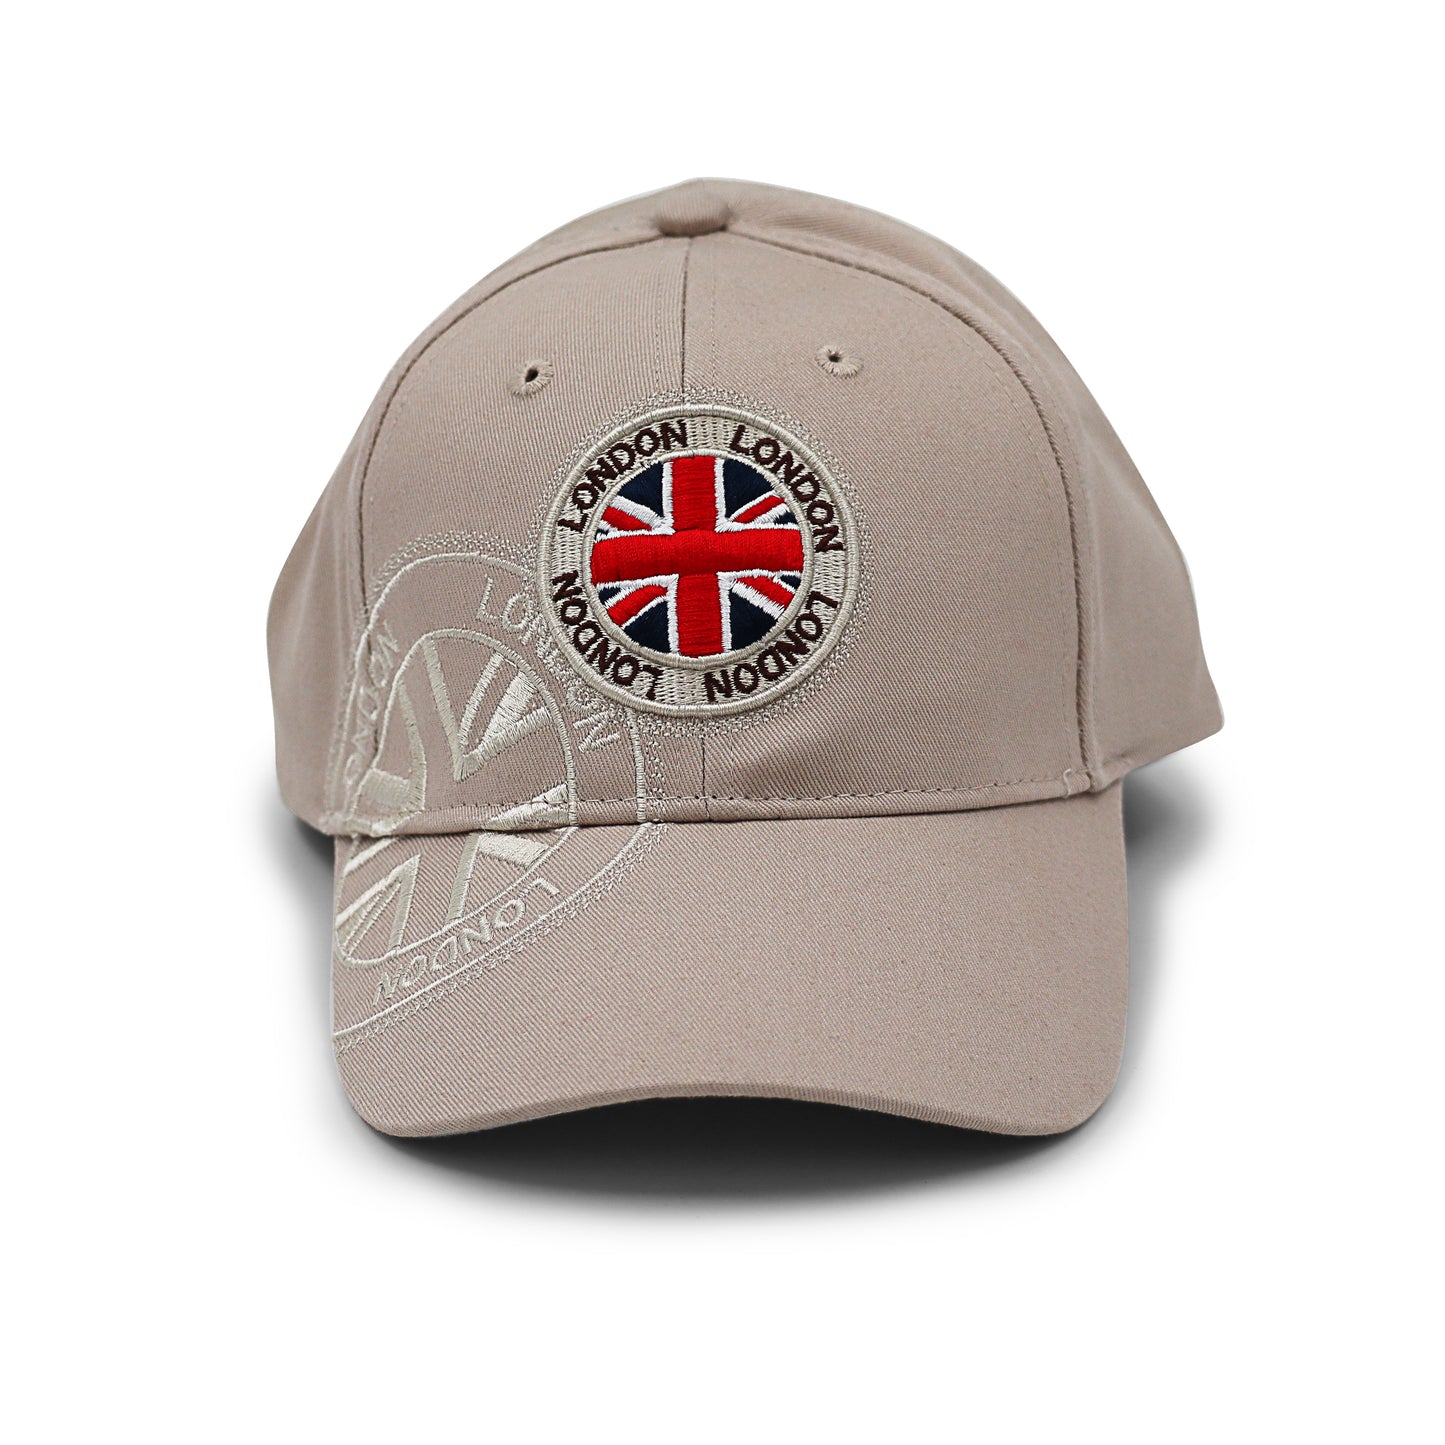 Classic London Cap With Embroidered Union Jack